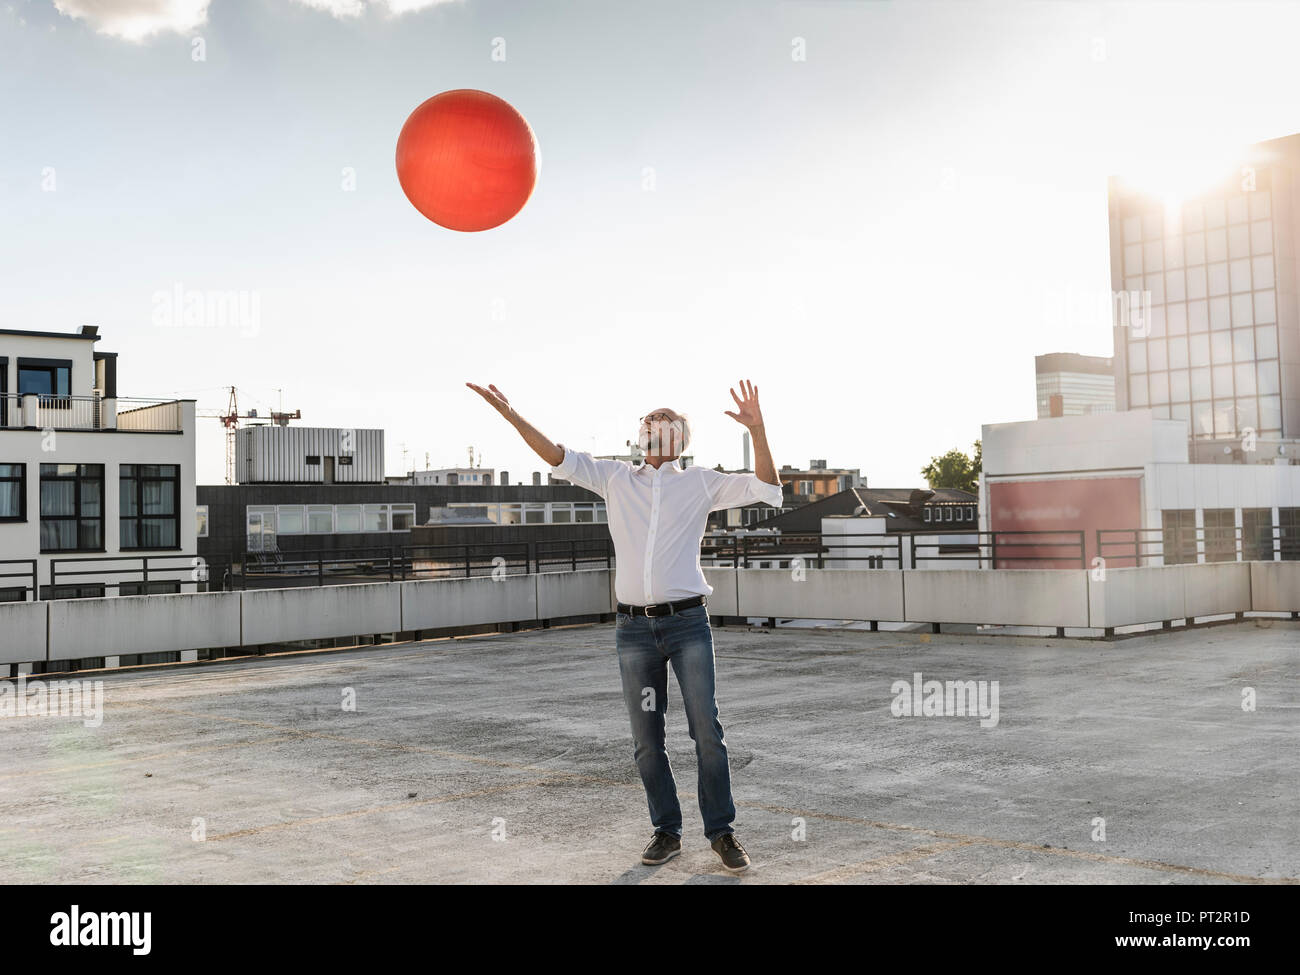 Mature man playing with orange fitness ball on rooftop of a high-rise building Stock Photo